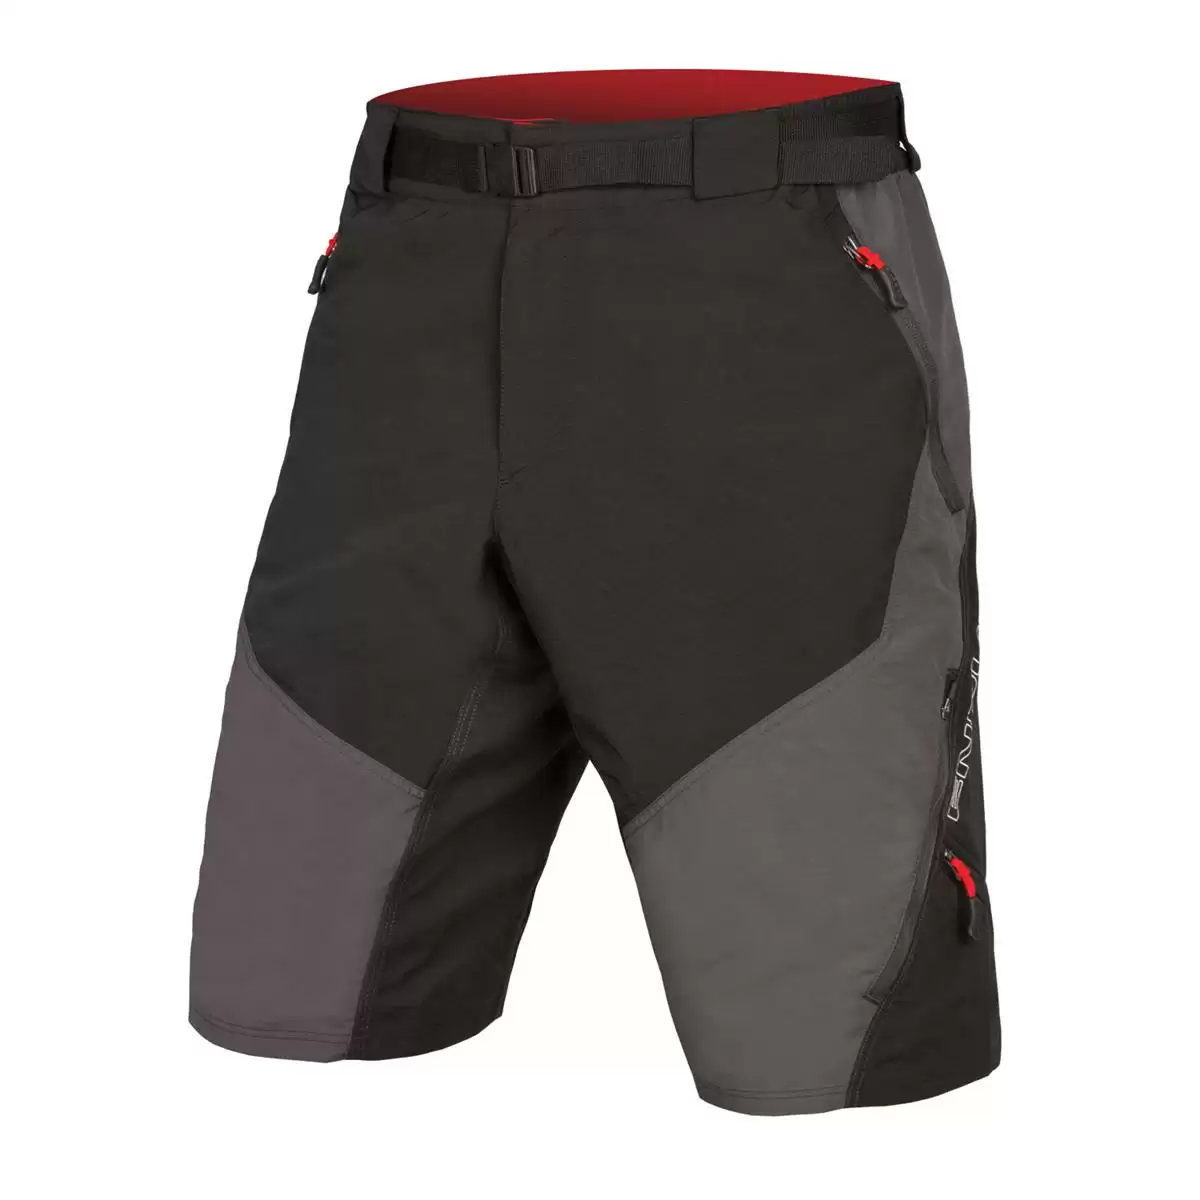 Shorts with liner Hummvee Short II grey size S - image